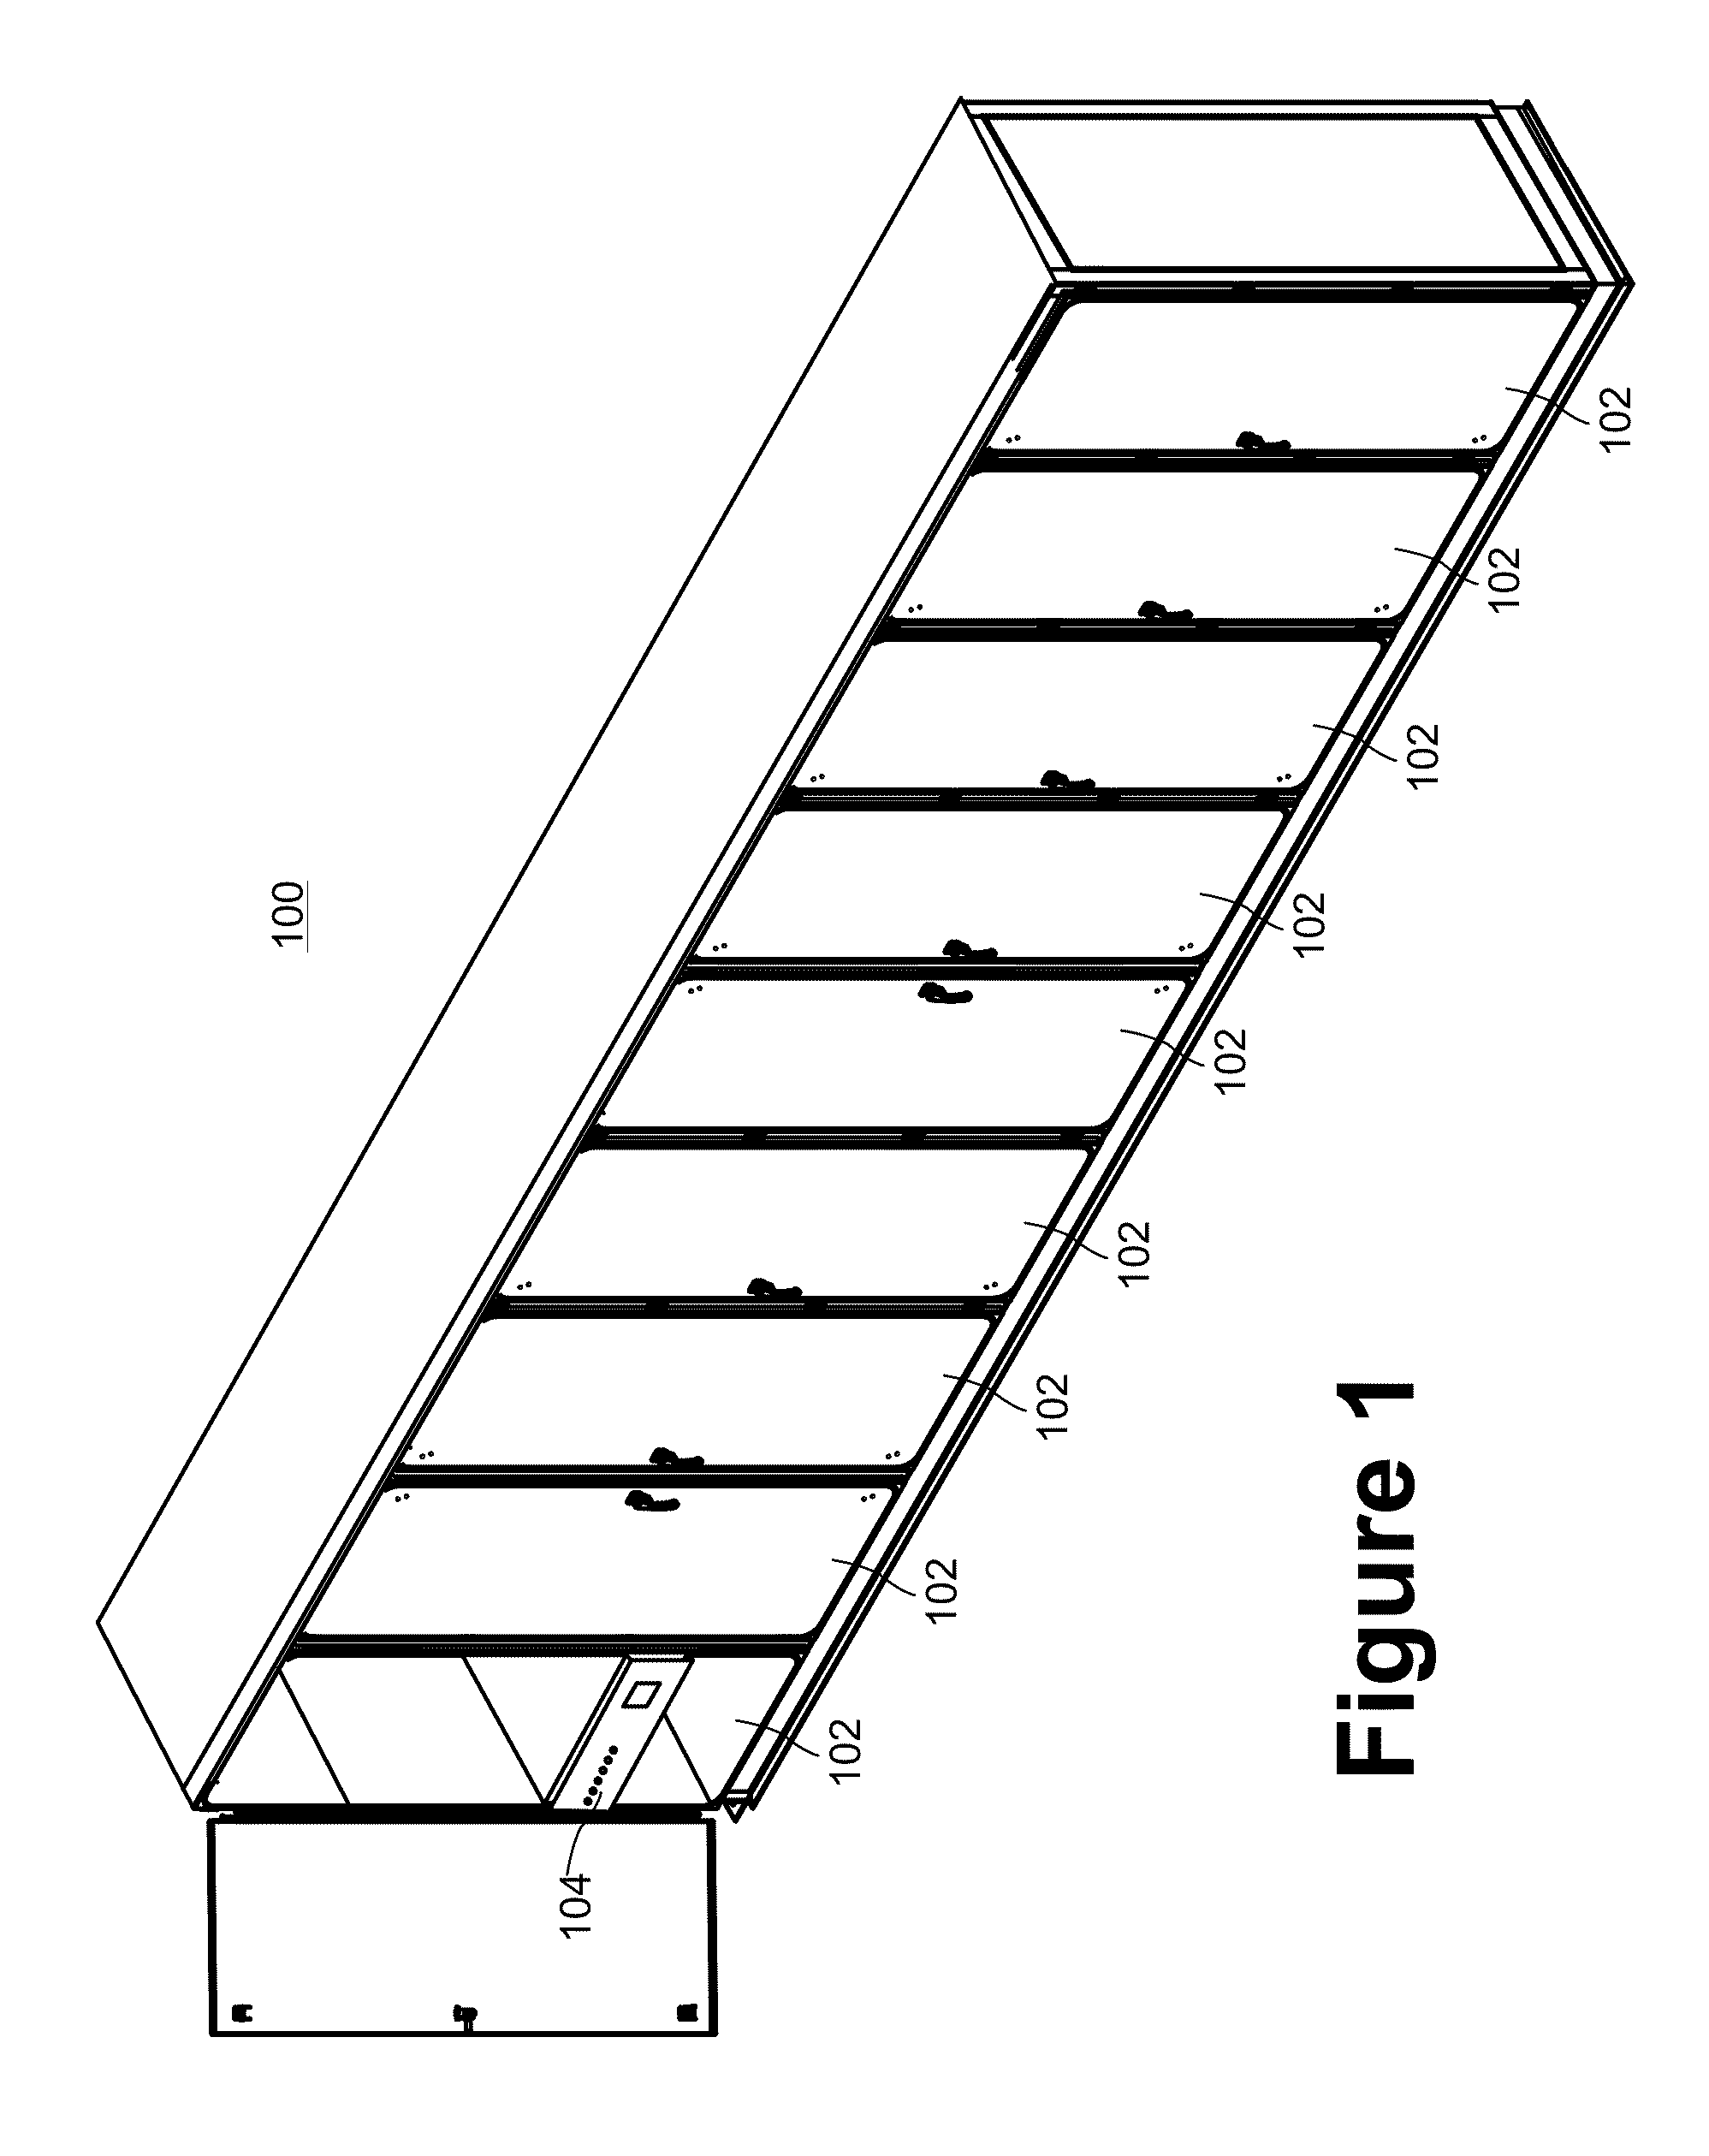 Electric power system control system with selective enclosure